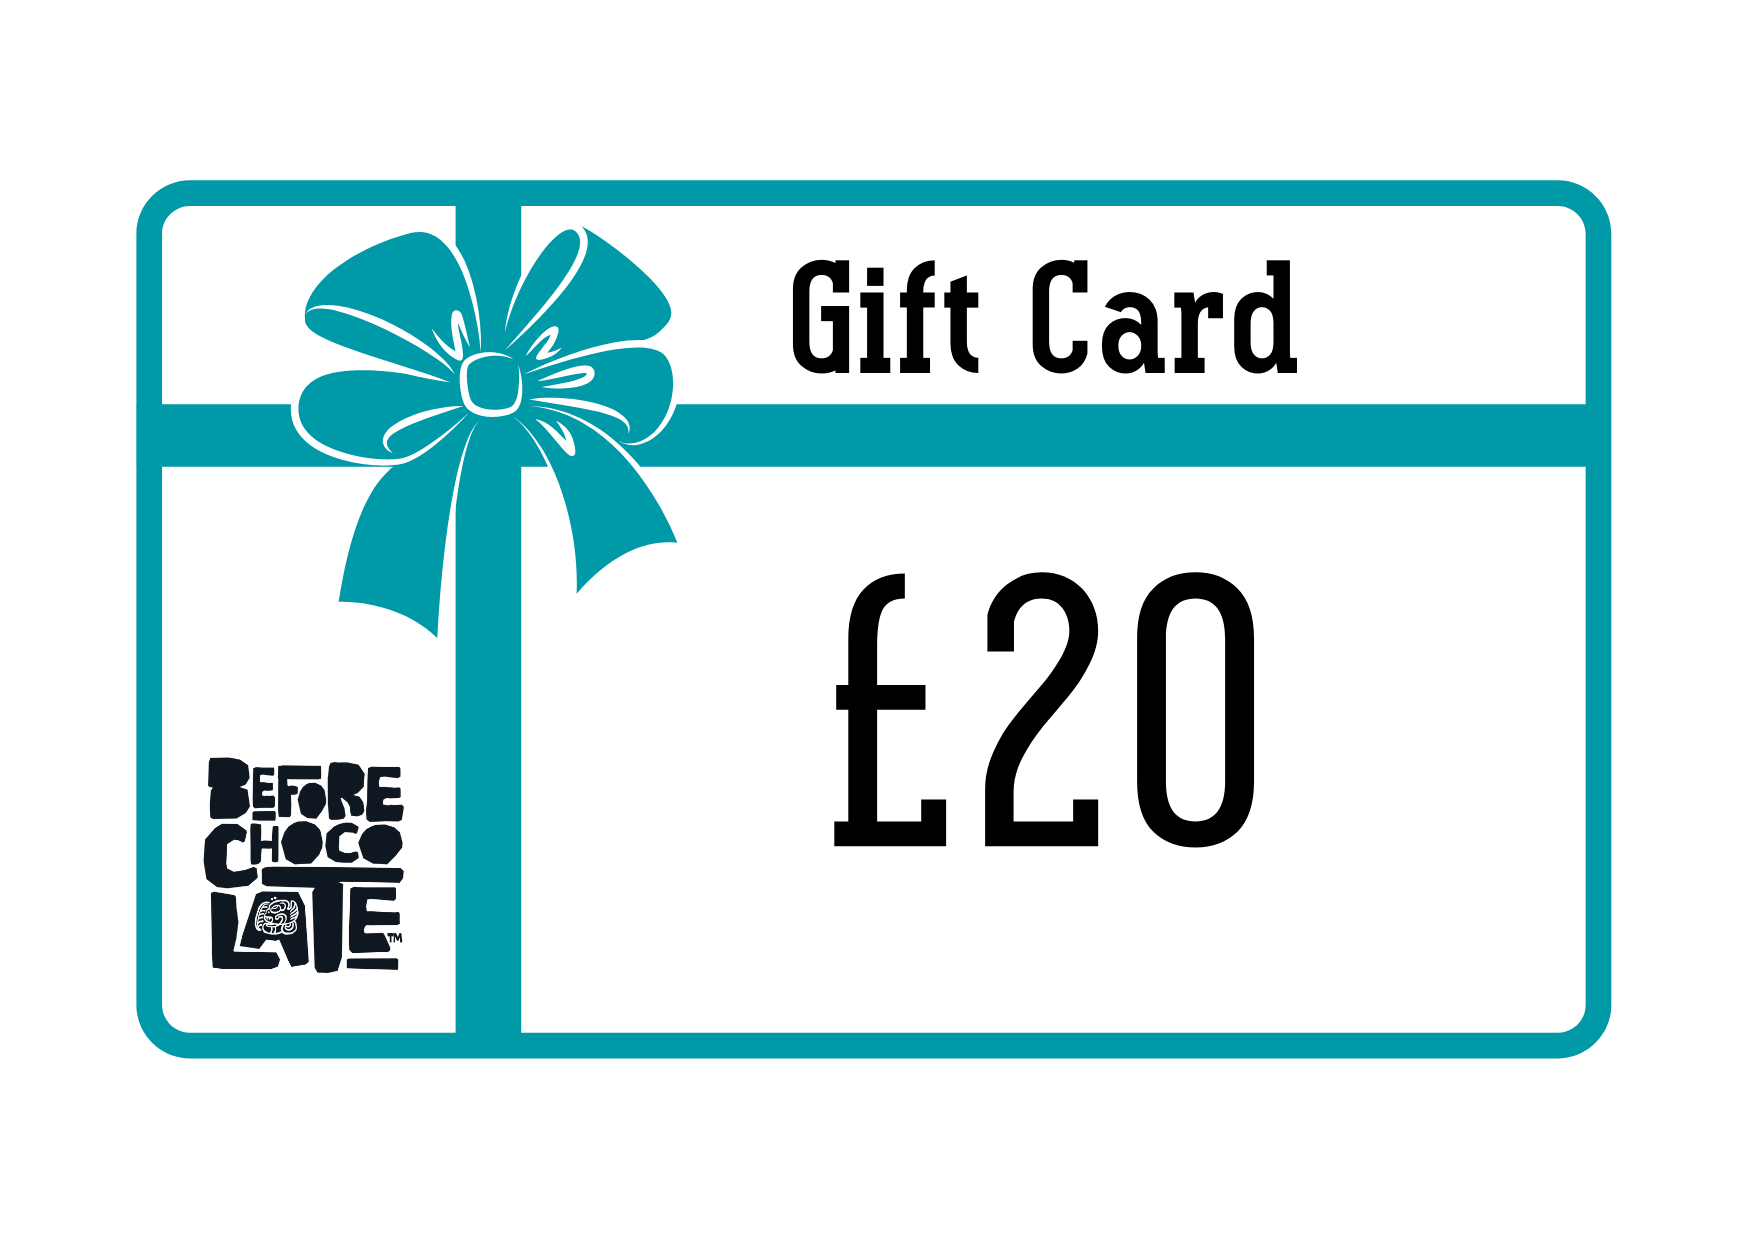 Before Chocolate Gift Card - £20